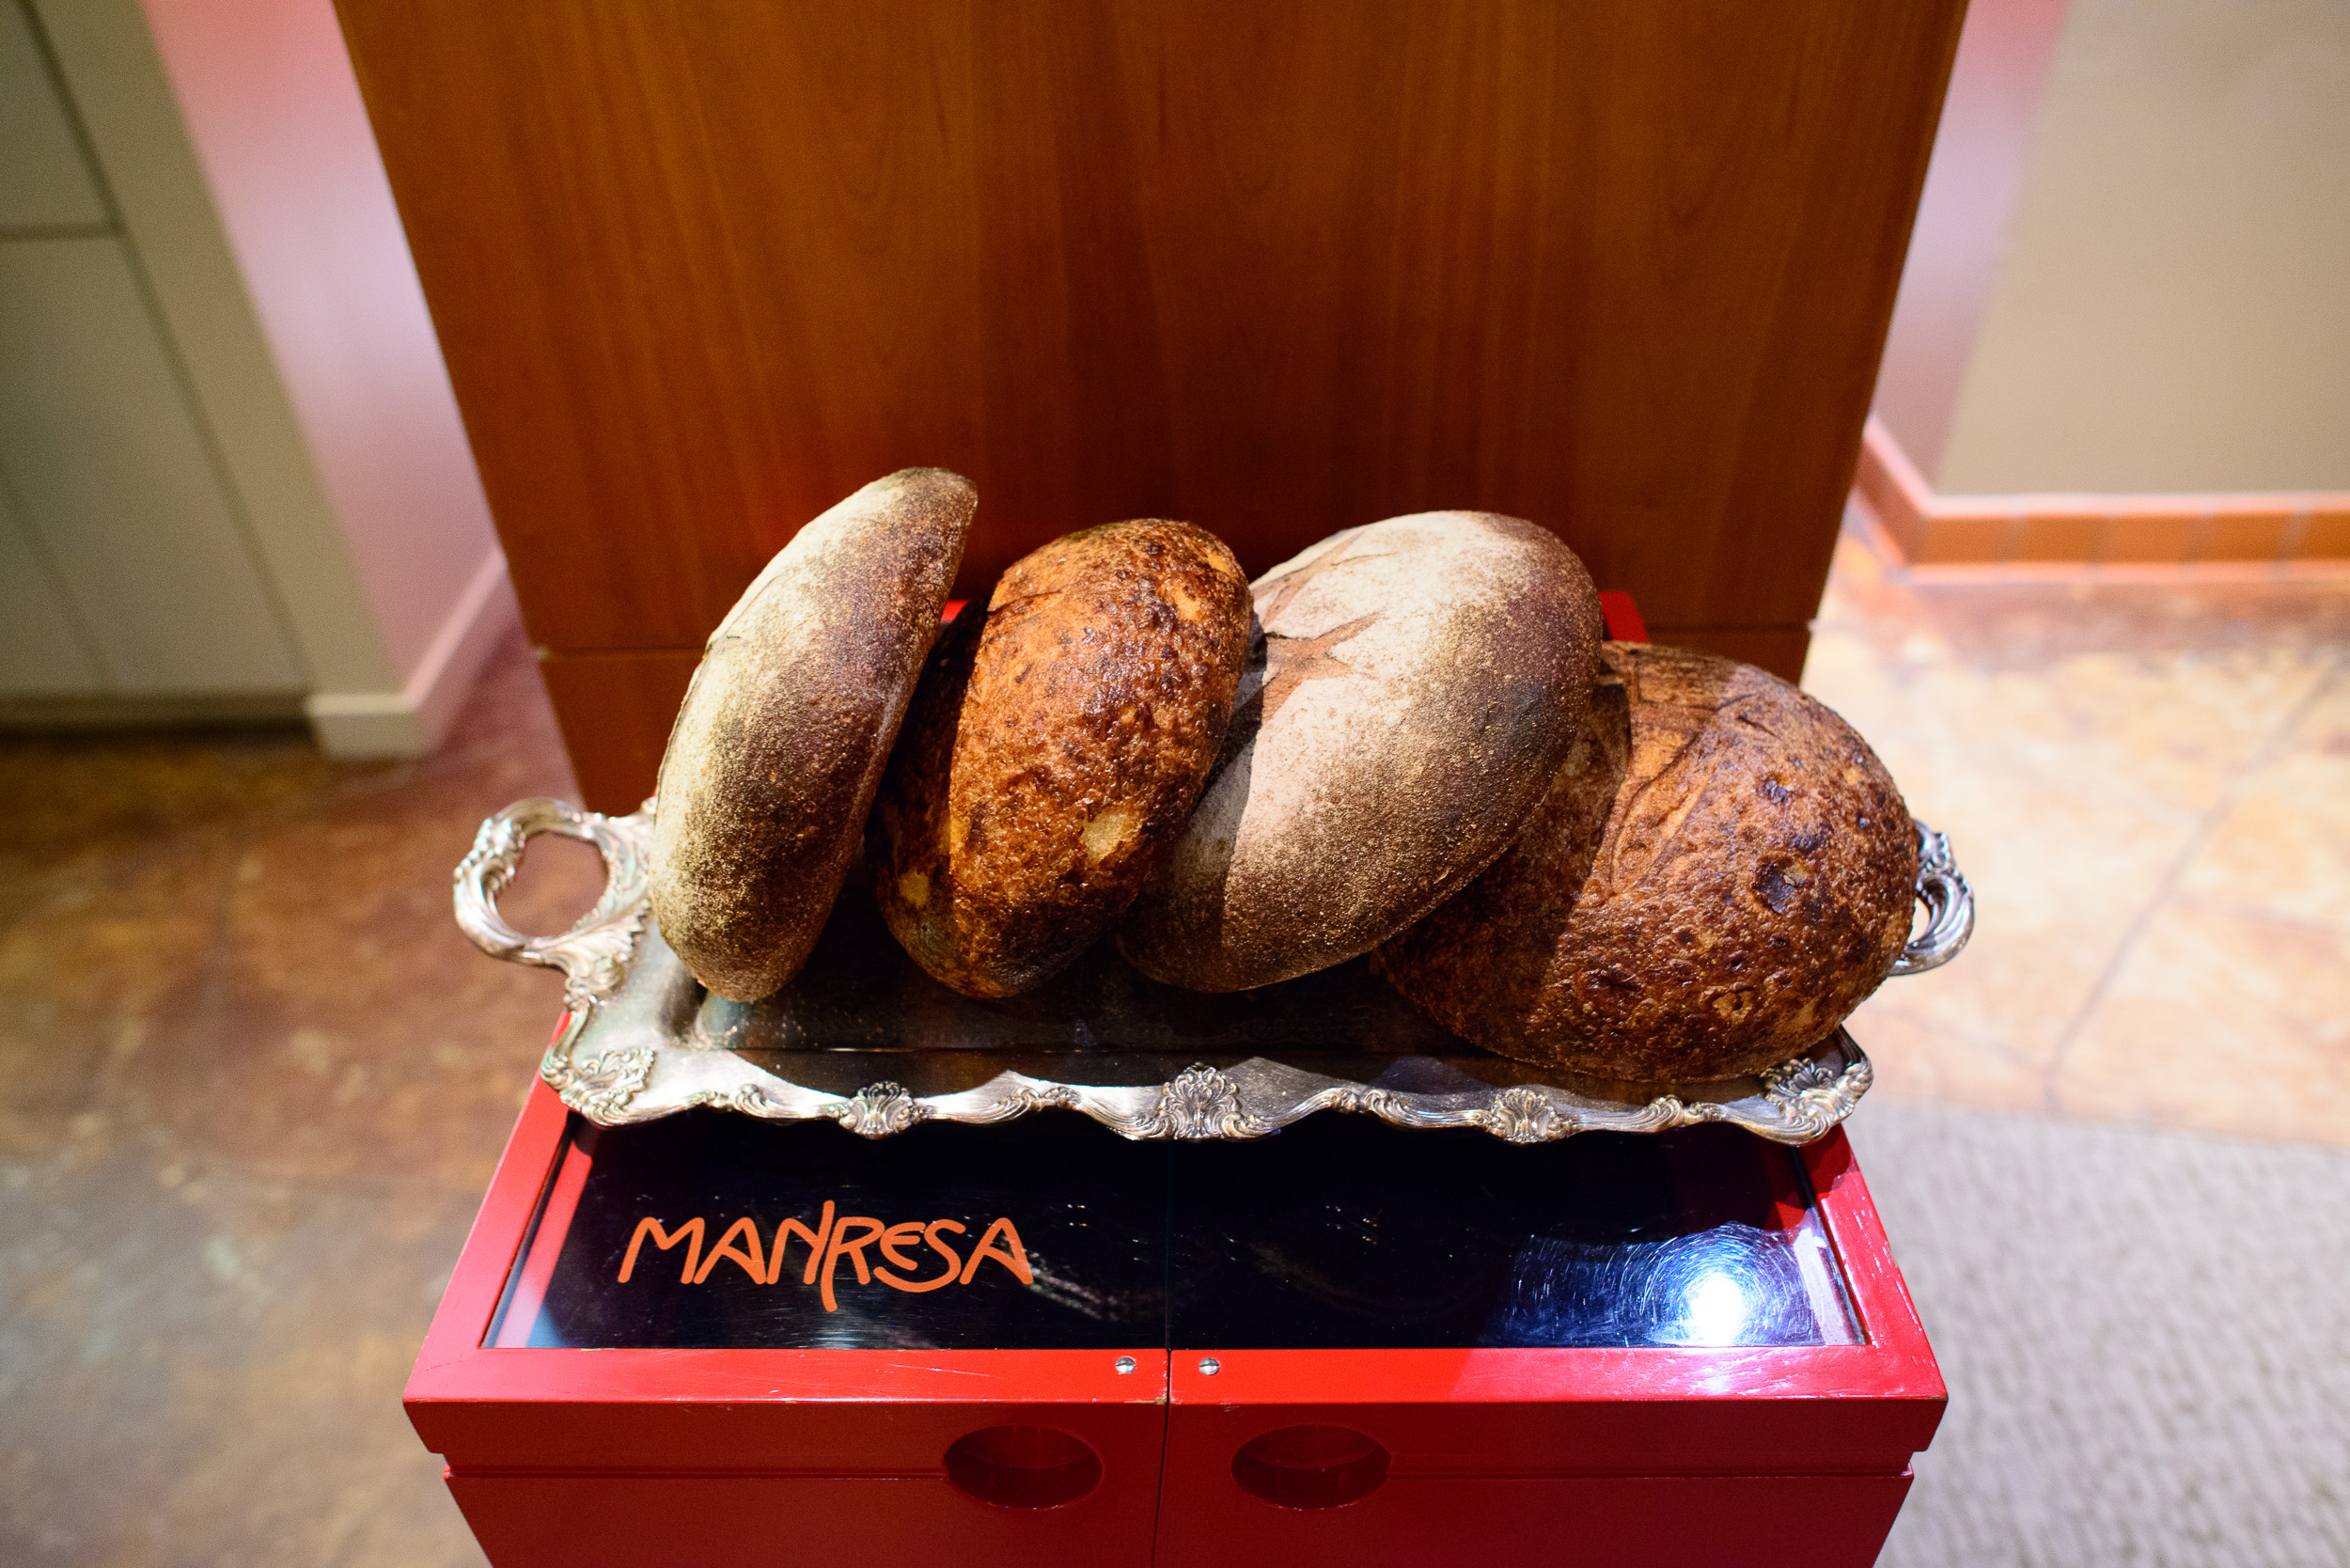 Manresa bread (currently being sold at Campbell farmers market)